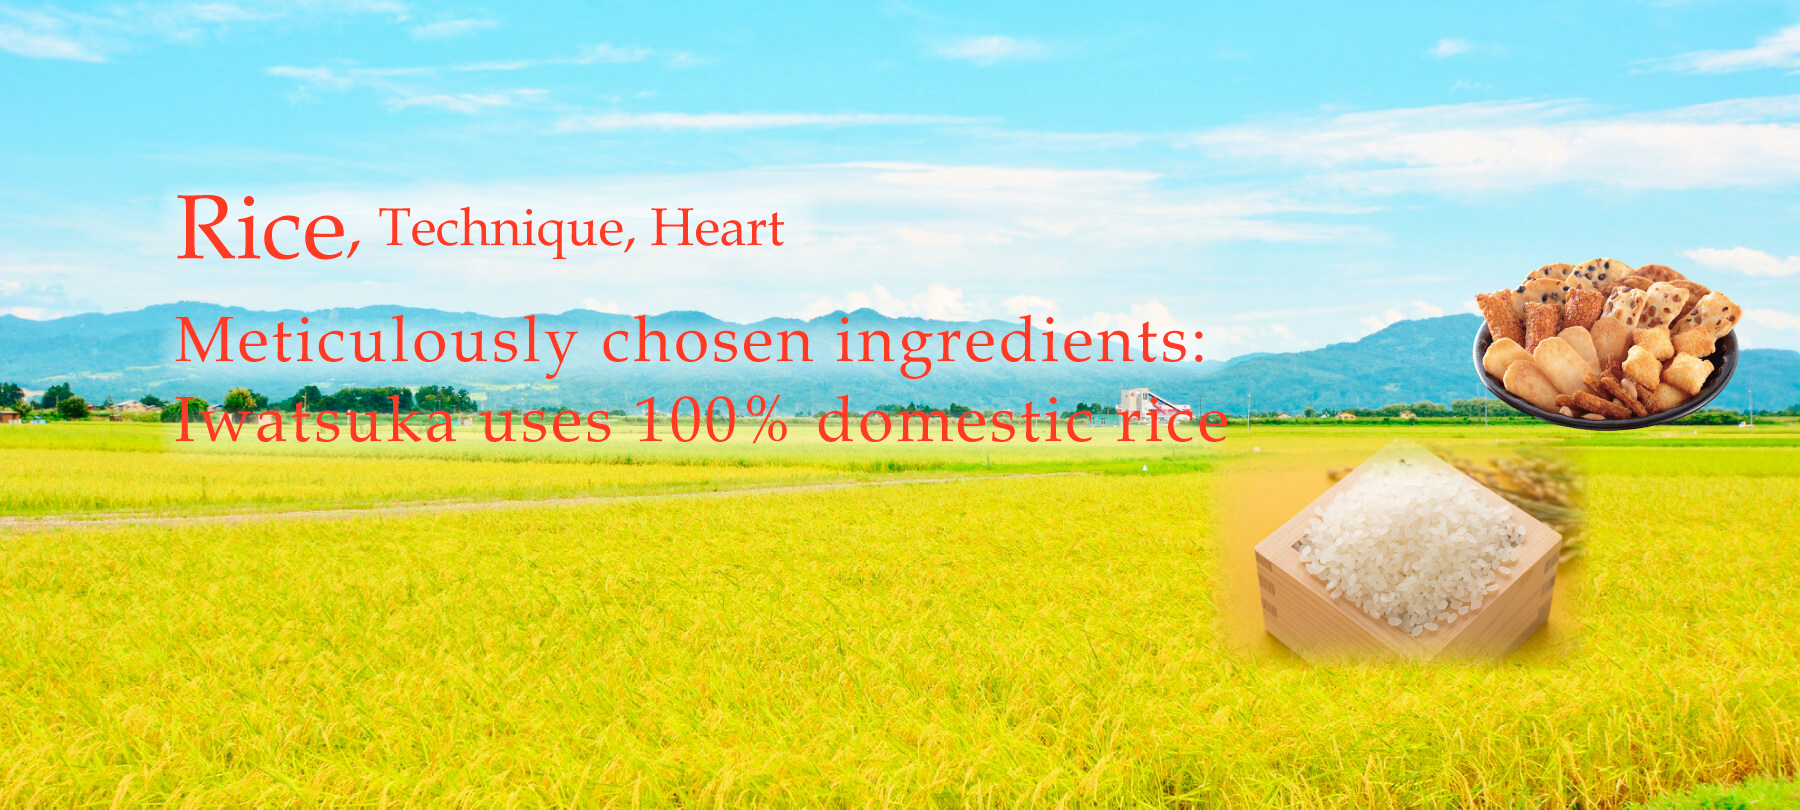 Rice,Technique,Heart Meticulously chosen ingredients: Iwatsuka uses 100% domestic rice